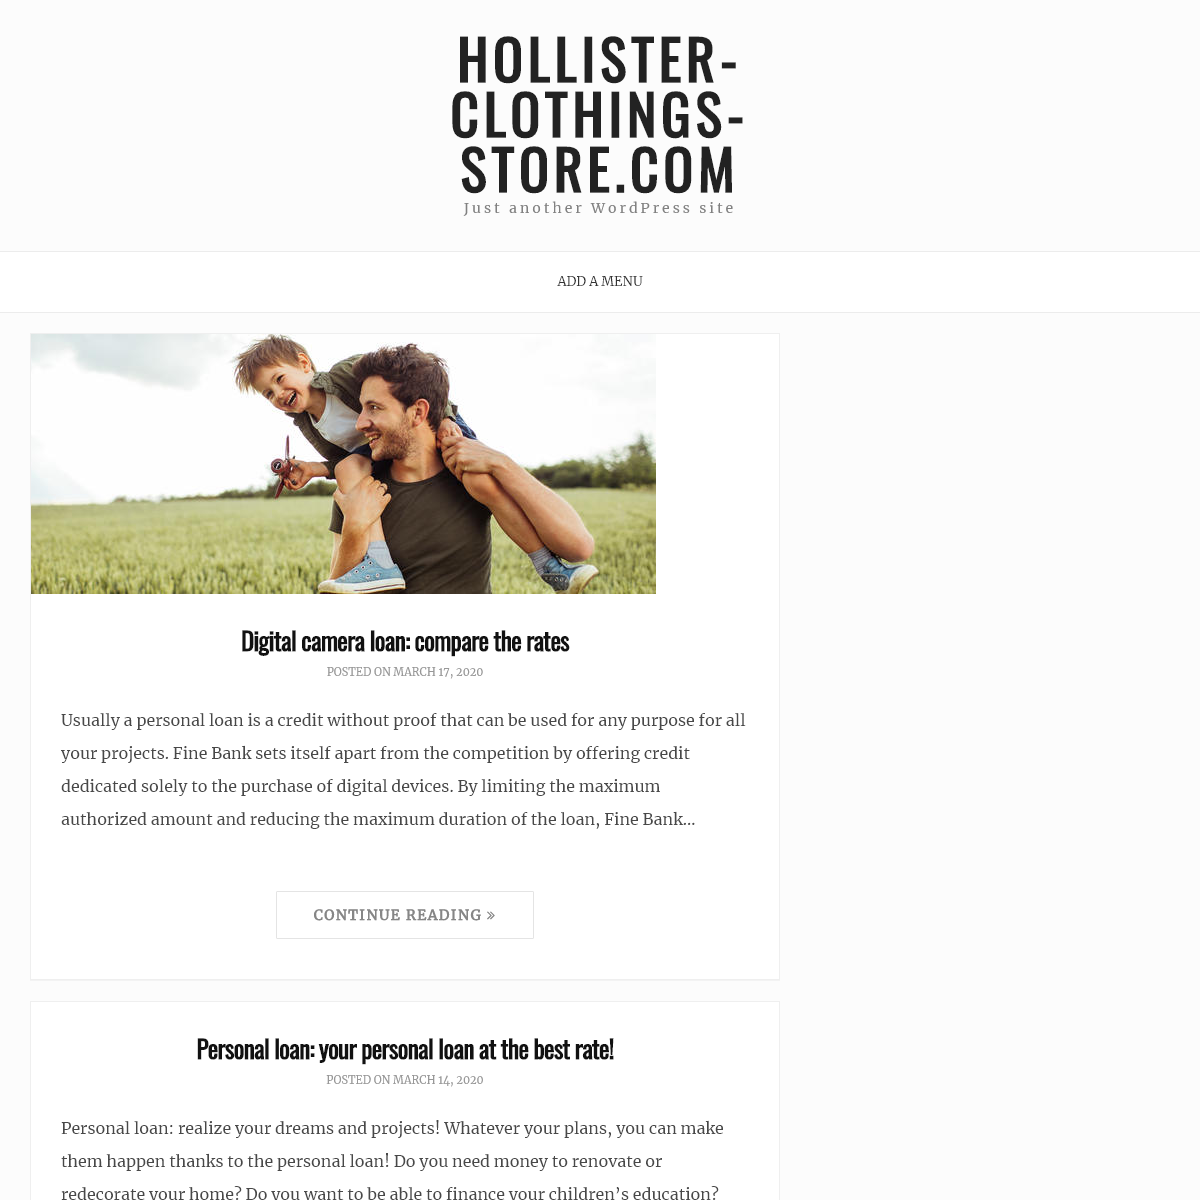 A complete backup of hollister-clothings-store.com